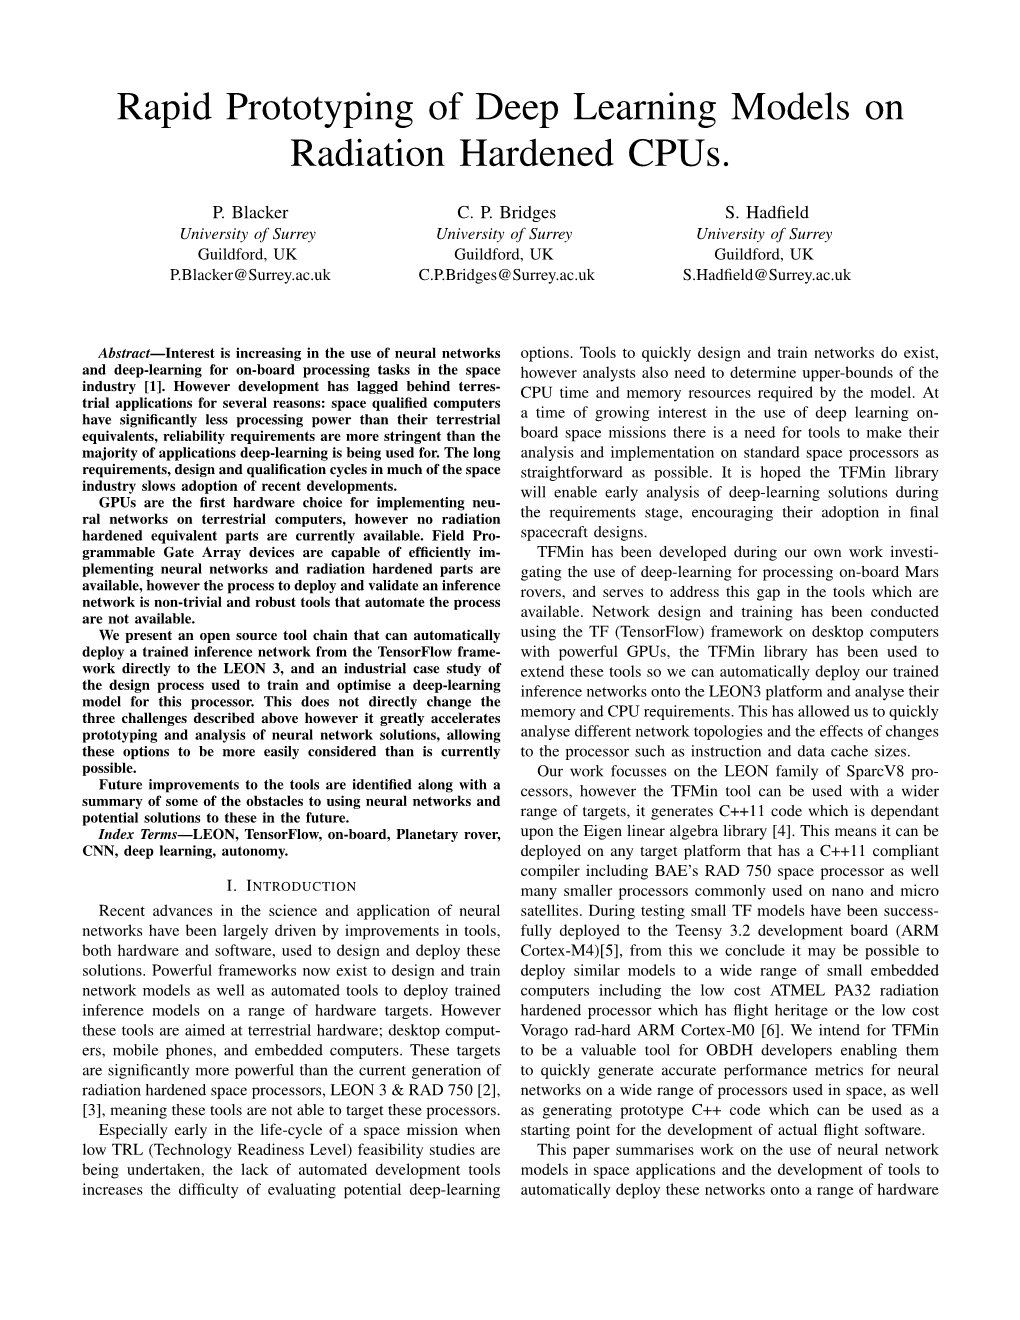 Rapid Prototyping of Deep Learning Models on Radiation Hardened Cpus